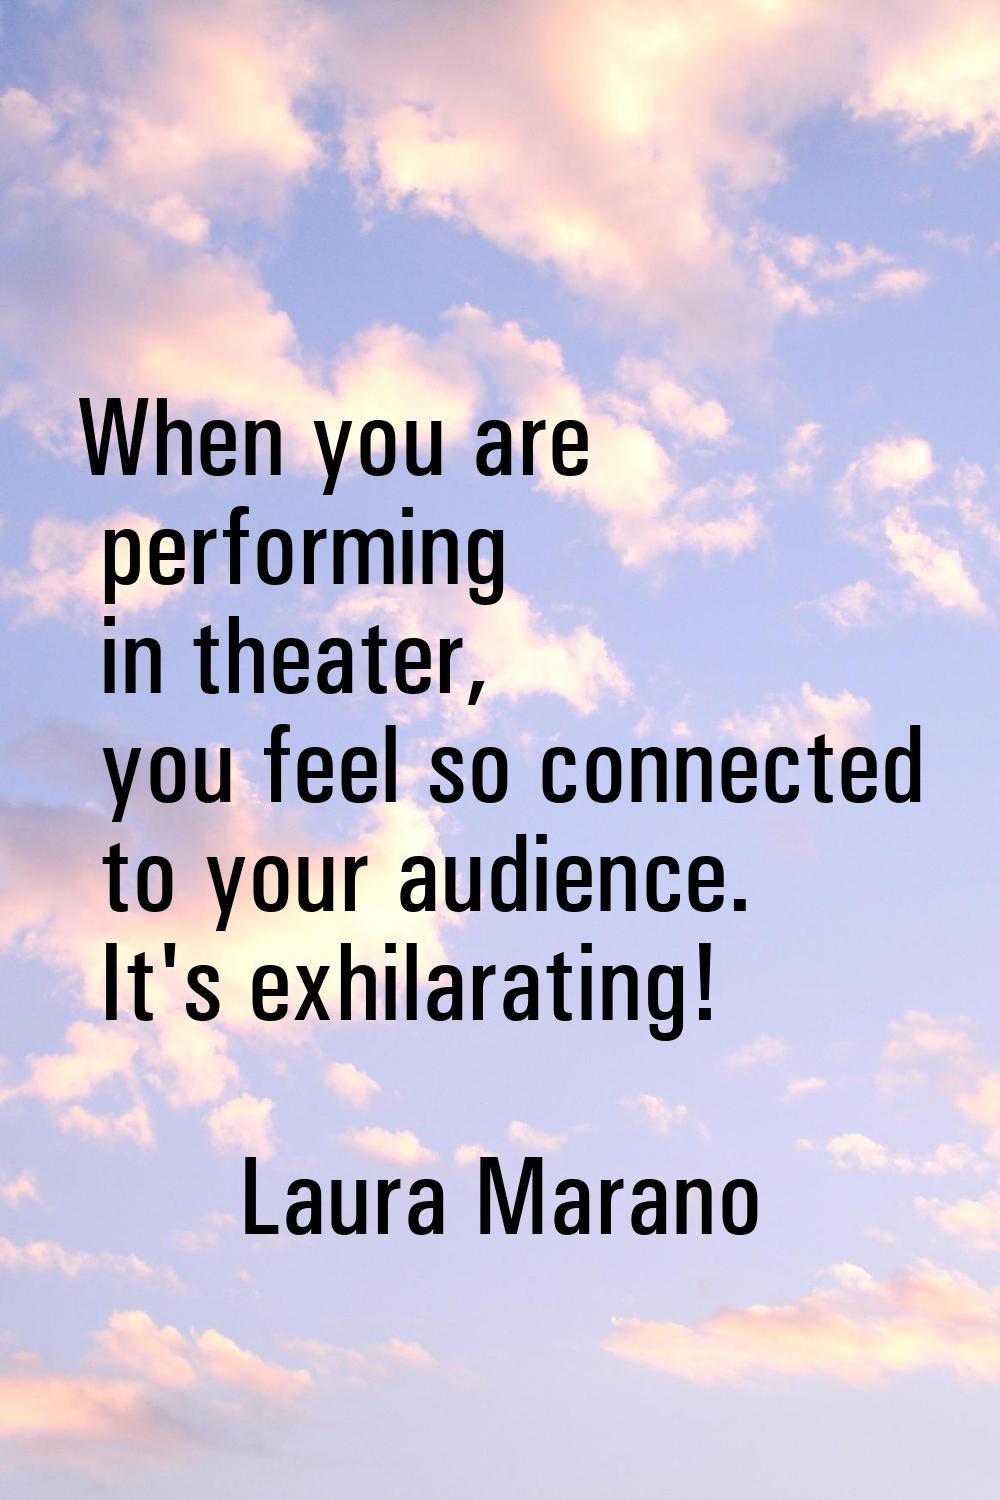 When you are performing in theater, you feel so connected to your audience. It's exhilarating!